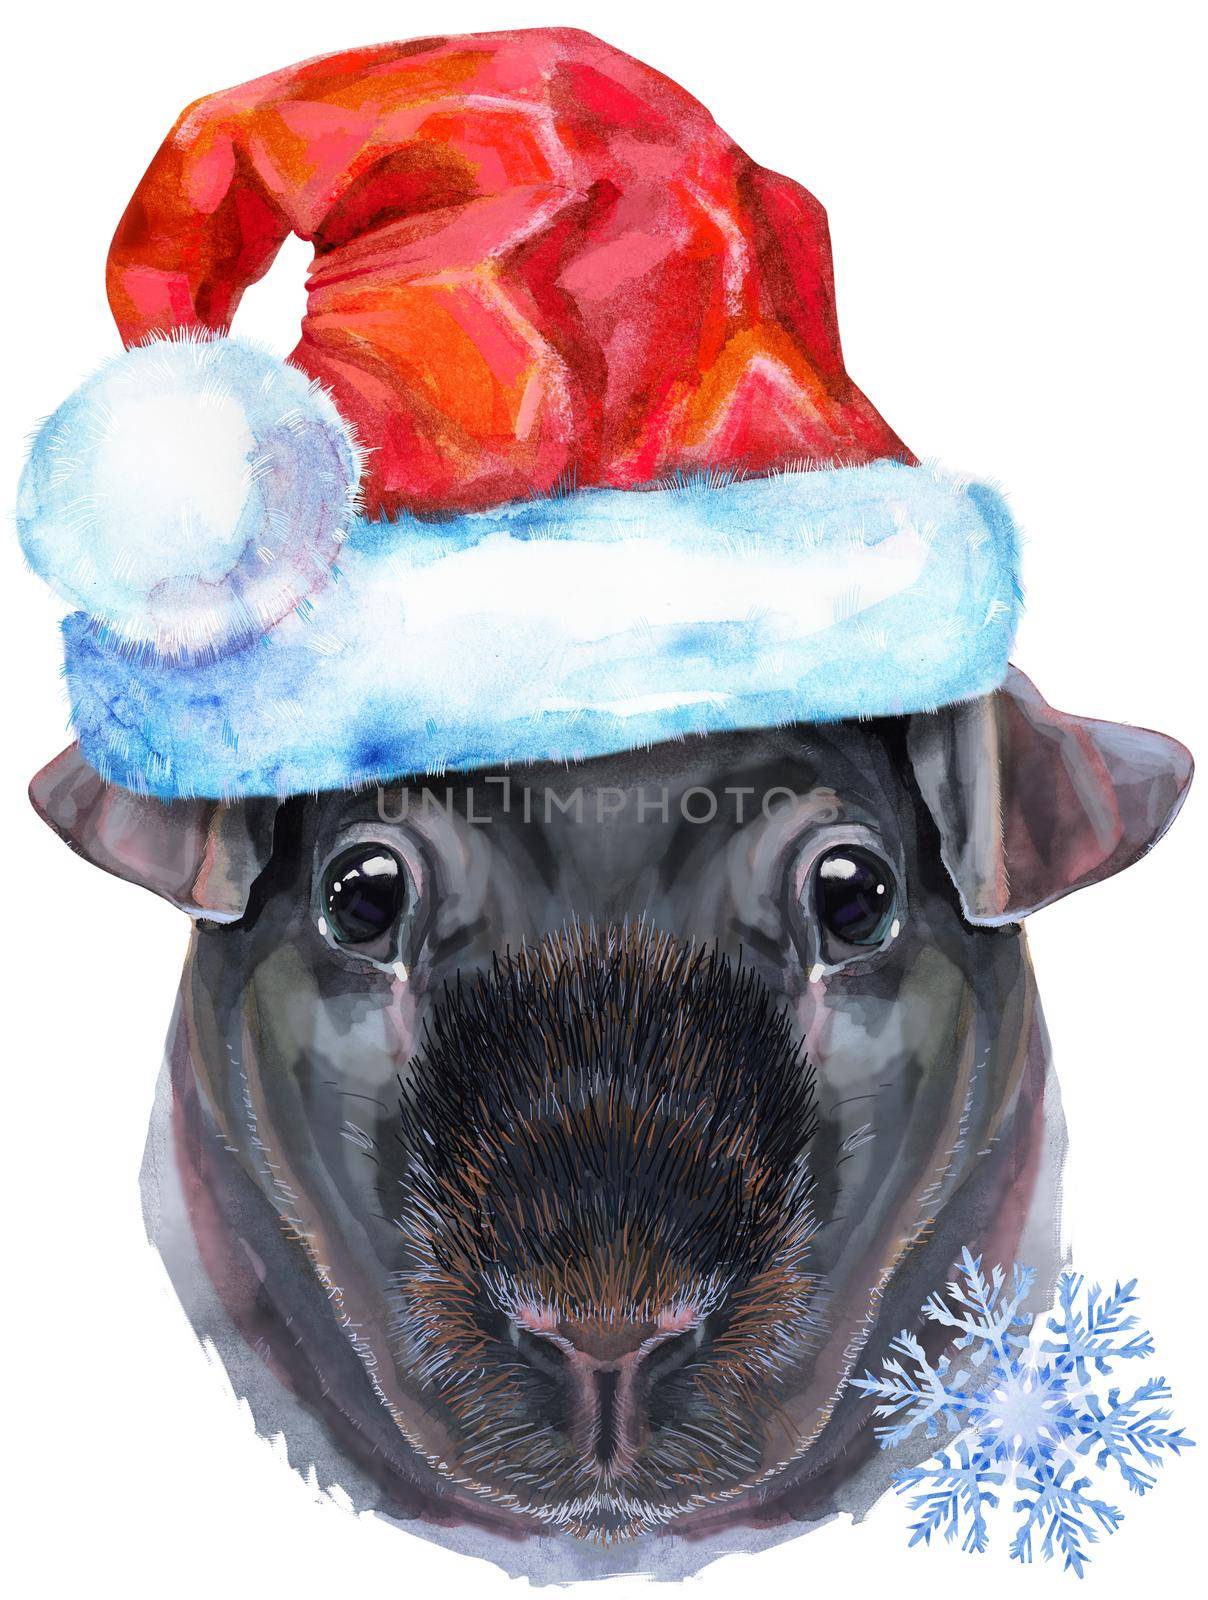 Watercolor portrait of Skinny Guinea Pig in Santa hat on white background by NataOmsk